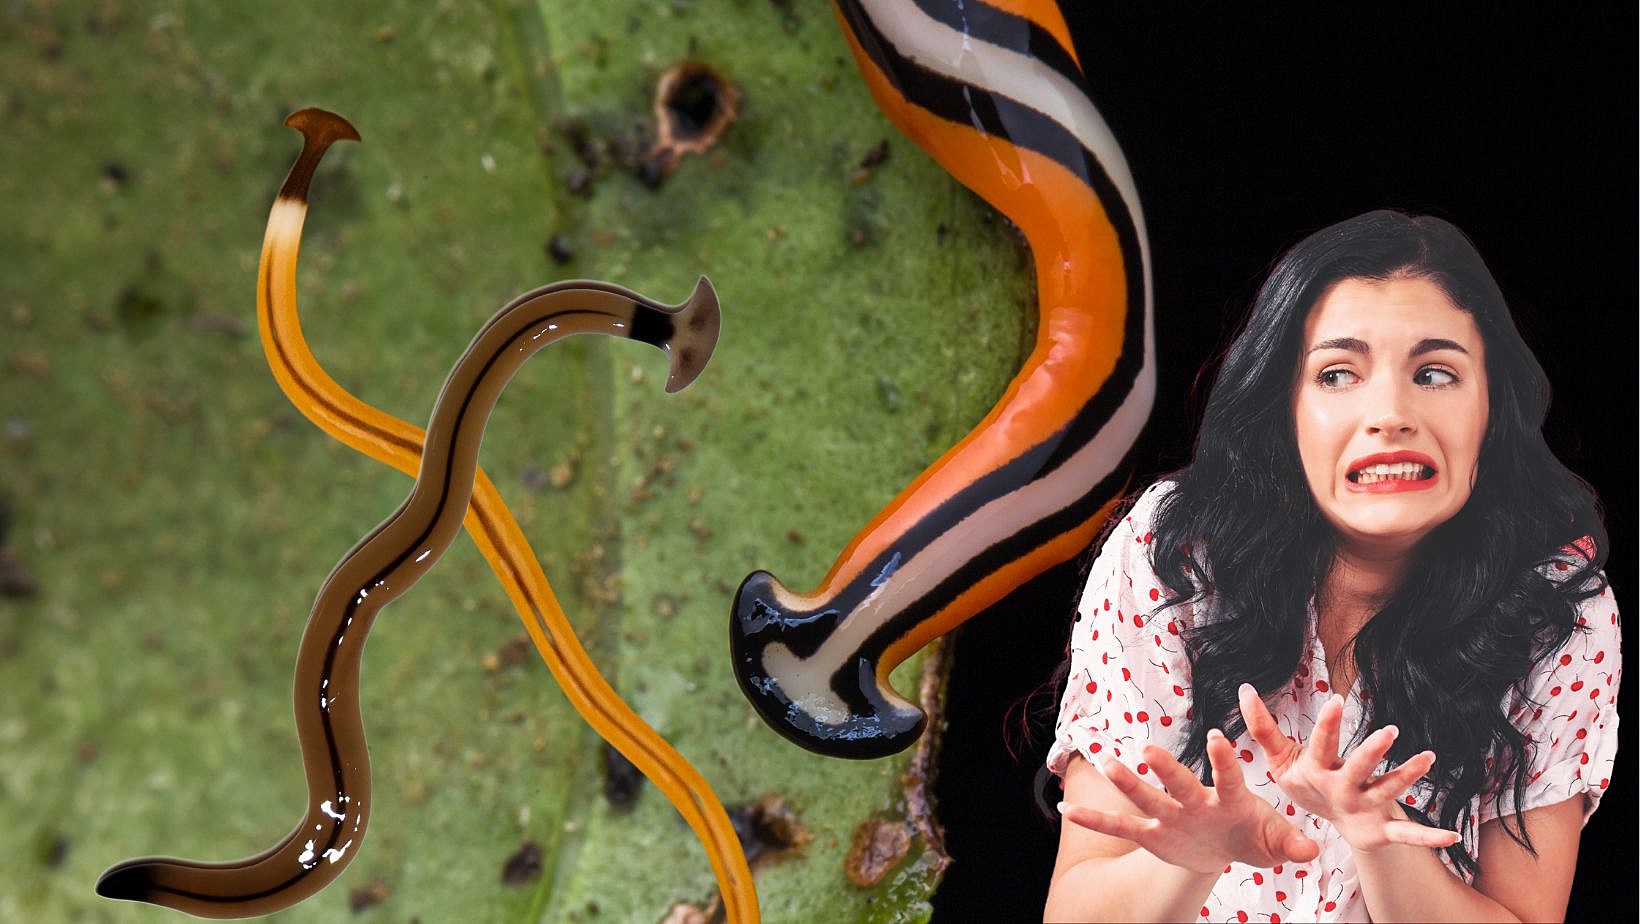 Poisonous Hammerhead Worms Invade Texas